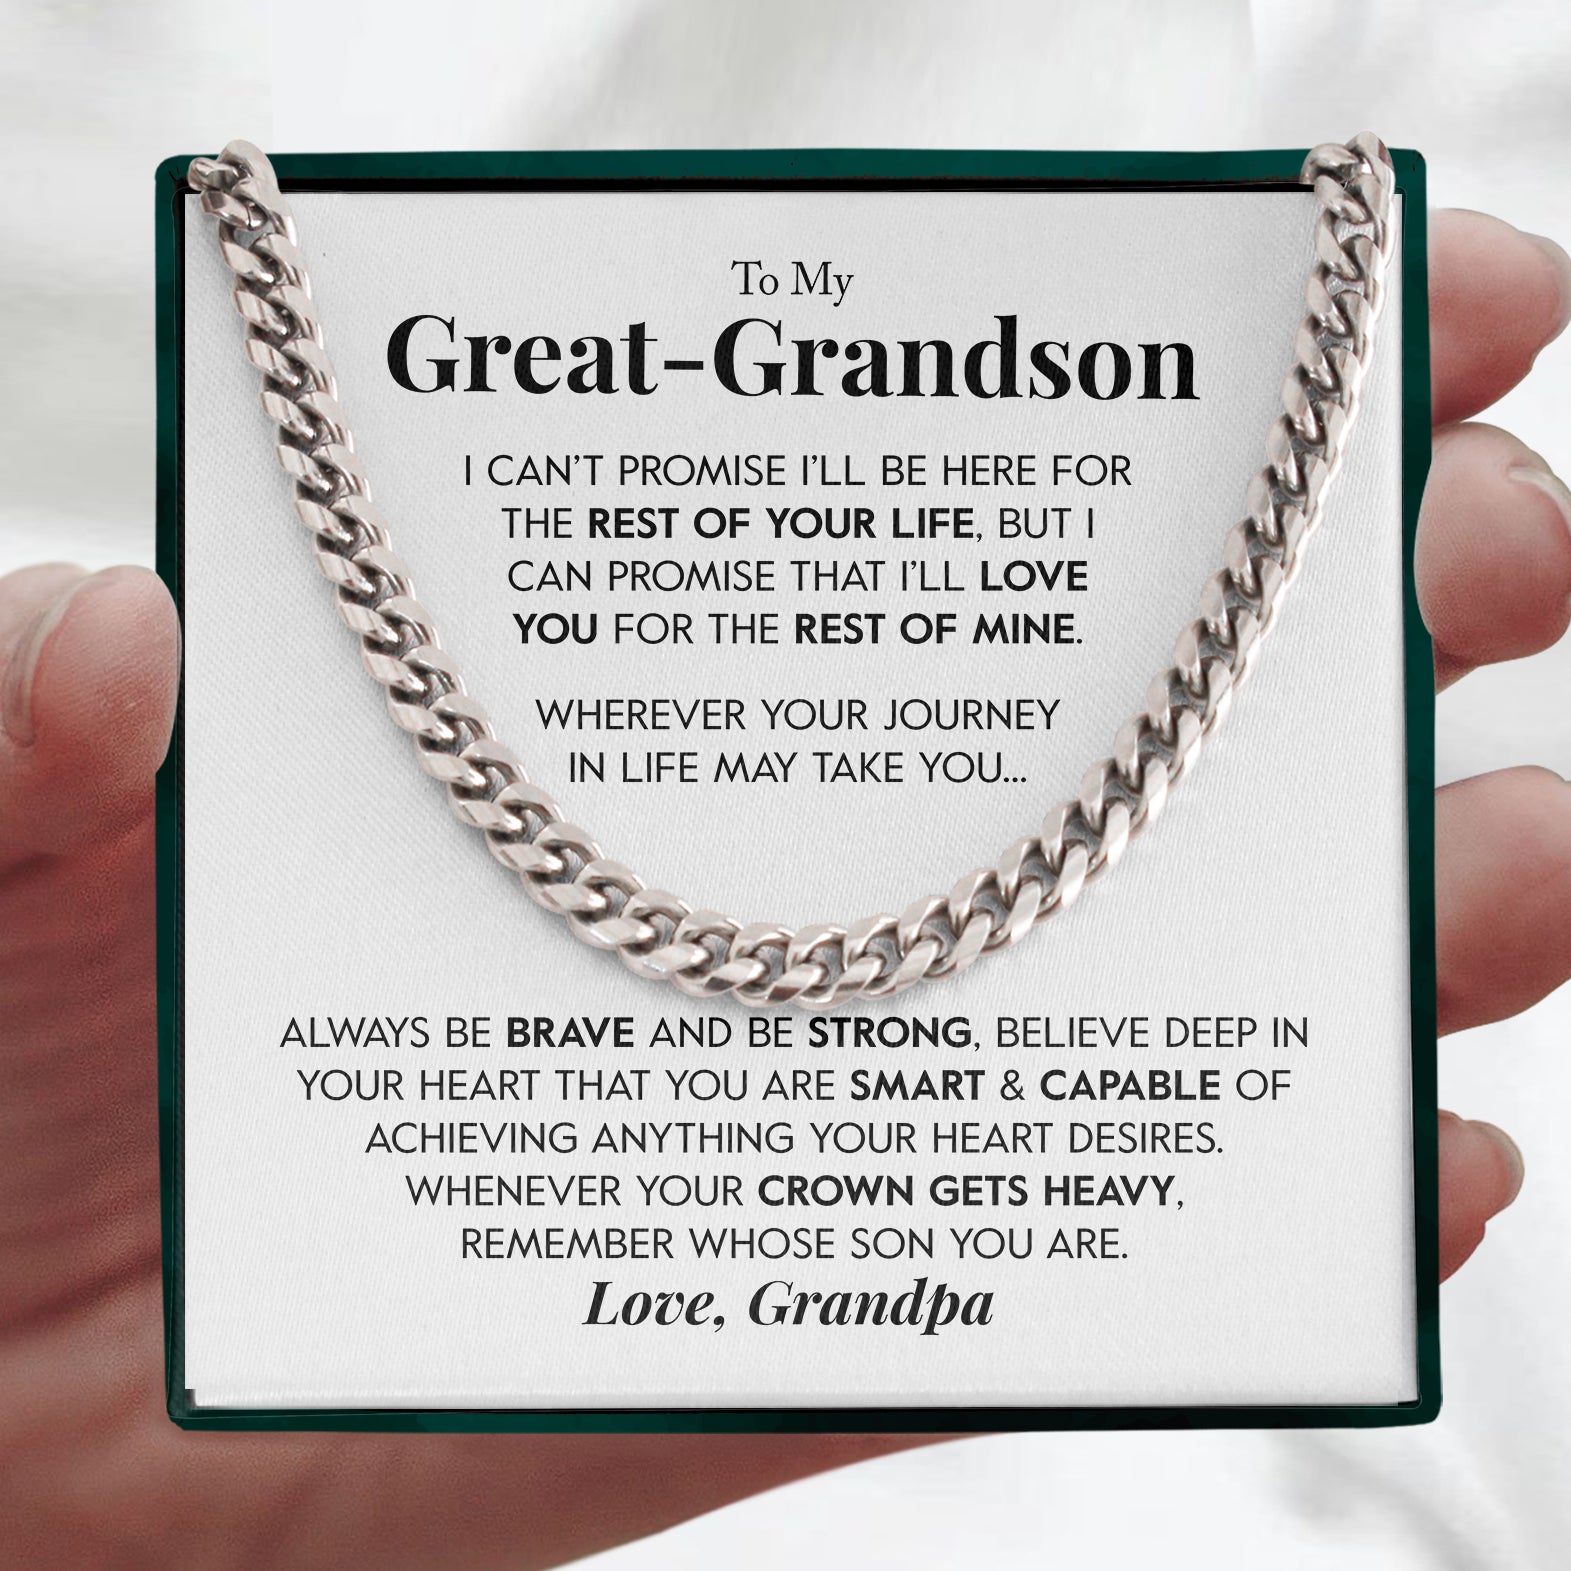 To My Great-Grandson | "Rest of My Life" | Cuban Neck Chain